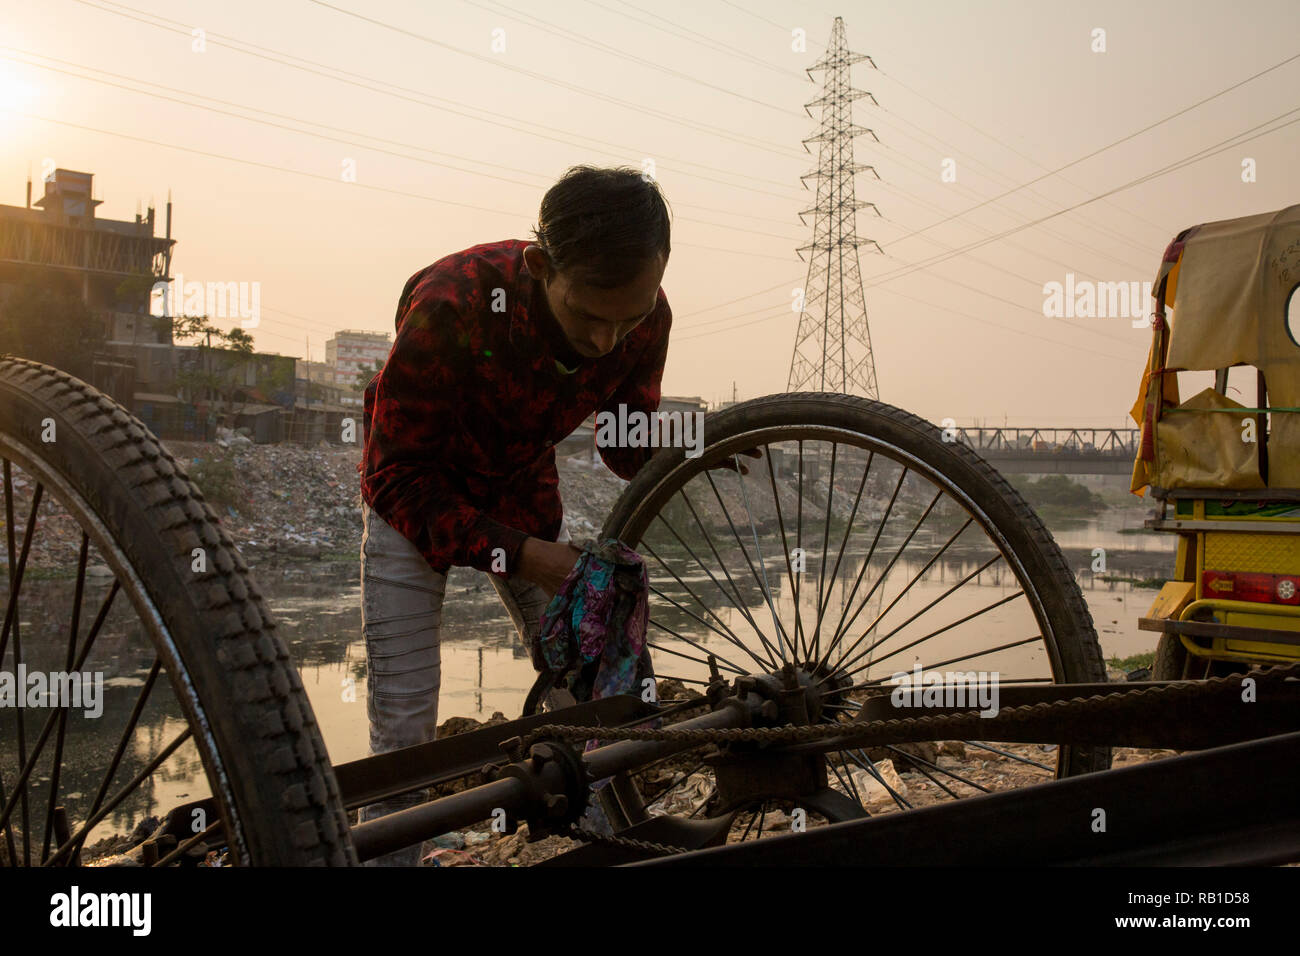 DHAKA, BANGLADESH - JANUARY 05 : A rickshaw puller repair his rickshaw on the Buriganga river in Dhaka, Bangladesh on January 05, 2019. The chemical waste of mills and factories, household waste eventually makes the Buriganga River miserable, which is considered to be Dhaka's lifeline.  Thousands of people depend on the river daily for bathing, washing clothes, irrigation of food and transportation of goods. The river has suffered extreme biodiversity loss and has now turned narrow. A large swathe of the Buriganga River, which is the lifeline of the capital, has turned pitch-black with toxic w Stock Photo